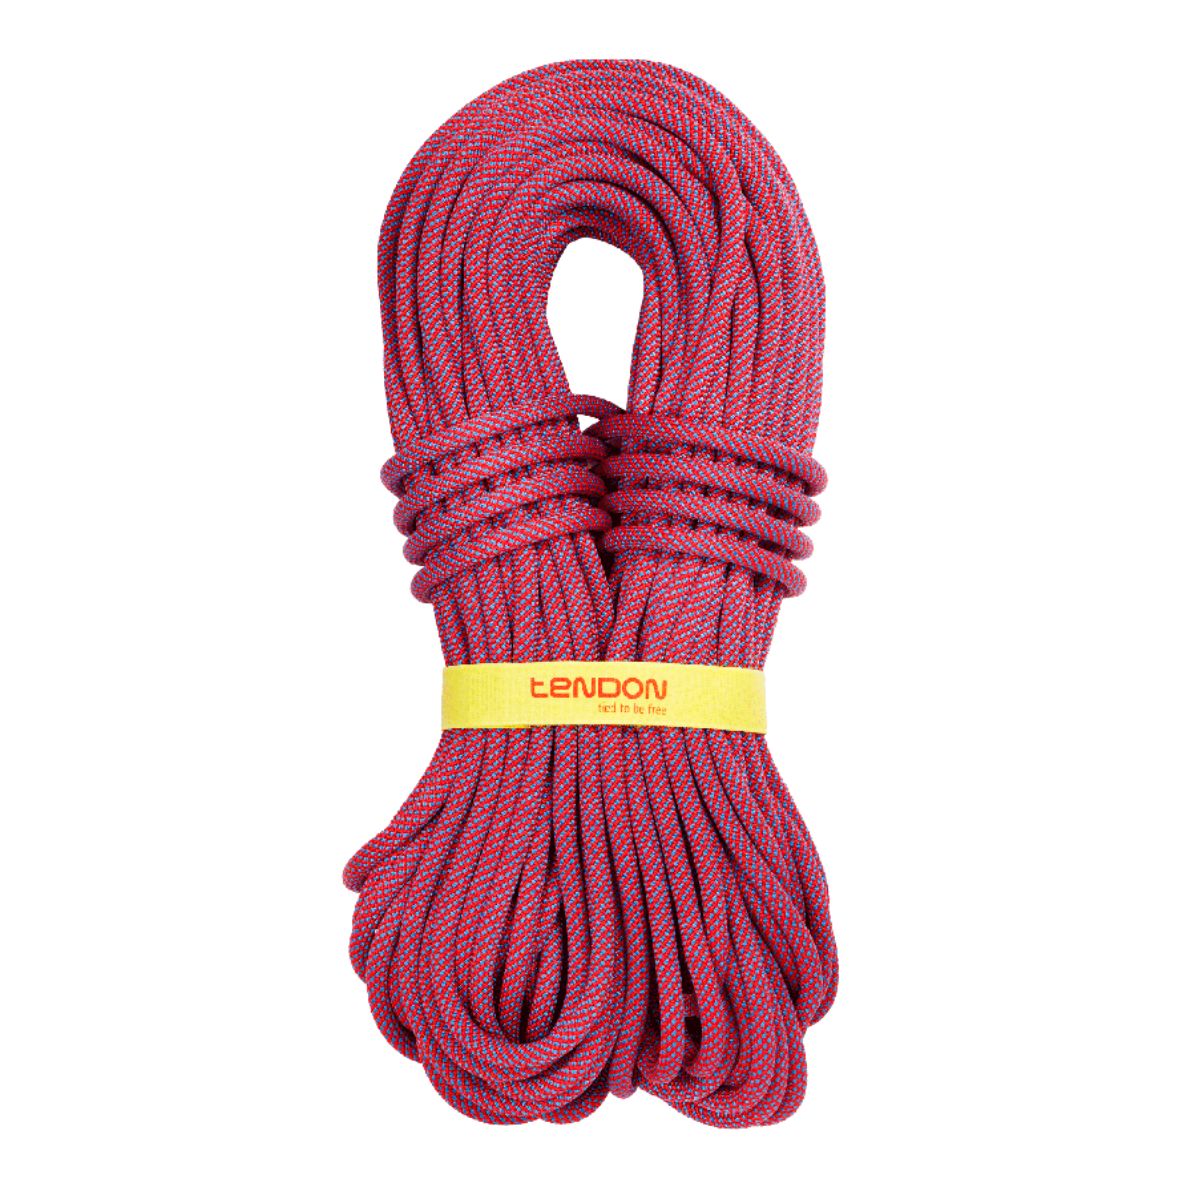 Ambition Rope - 50 meters - Red/Pink